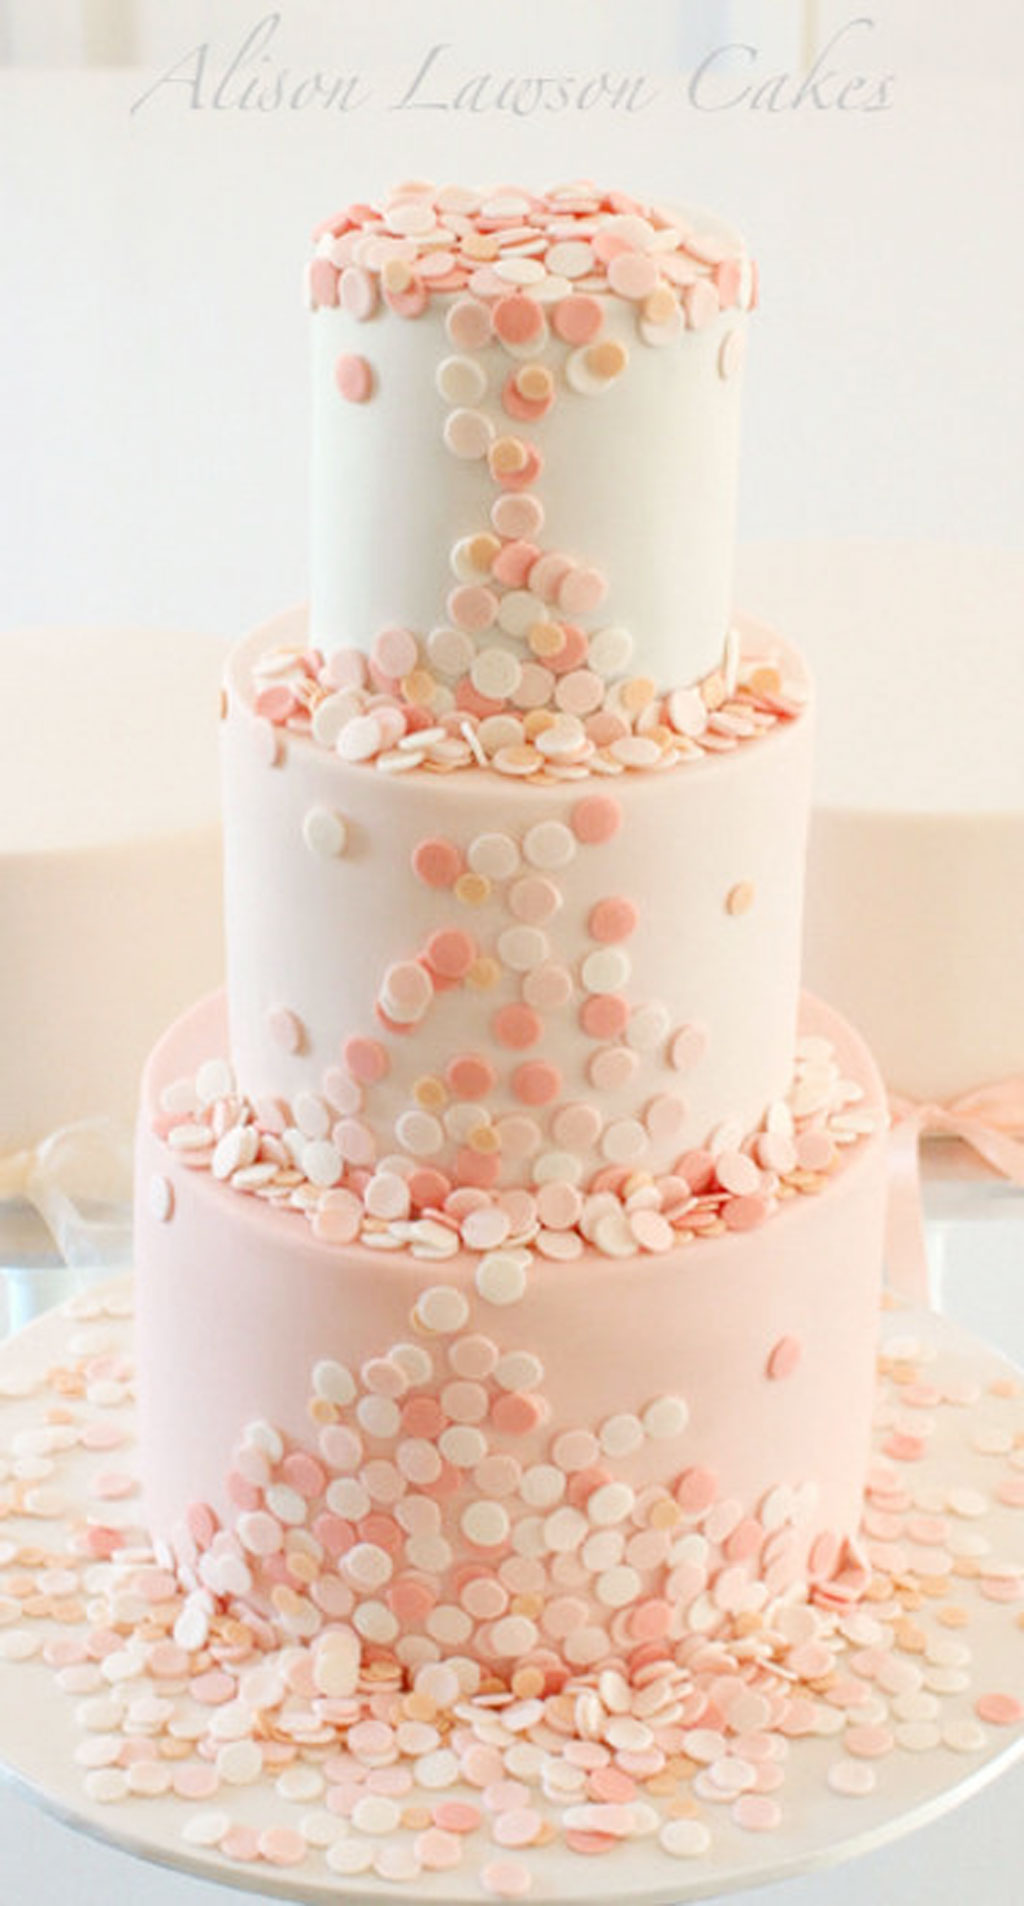 Bonnie Belles Pastries/WEDDING CAKES/FOUNTAIN CAKE --3 TIER AND SIDES